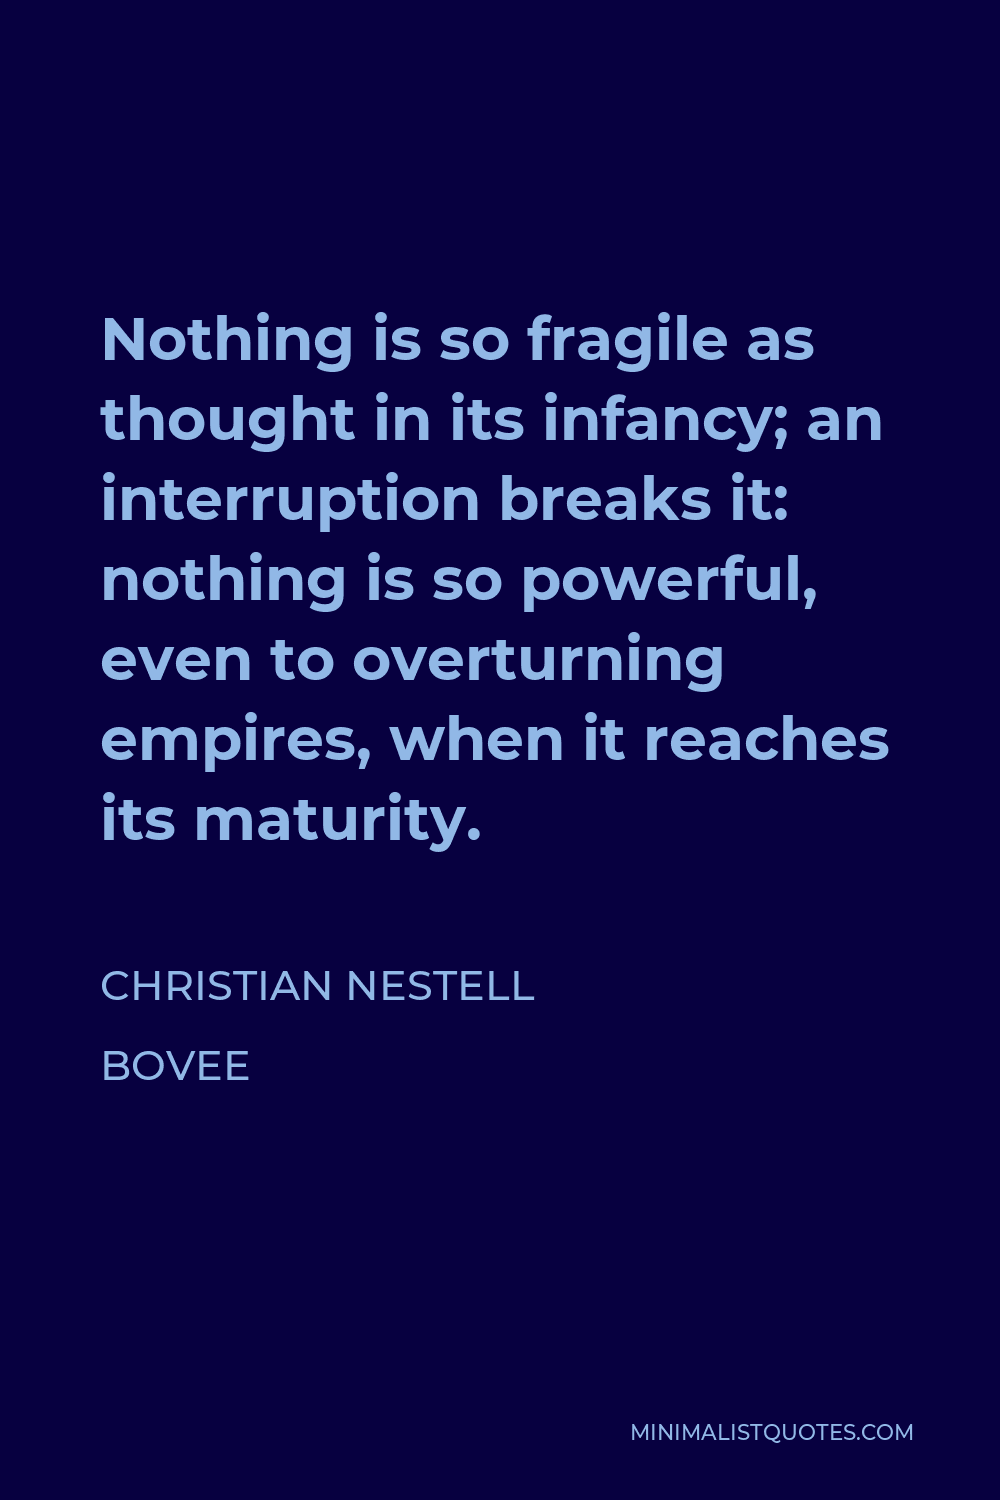 Christian Nestell Bovee Quote - Nothing is so fragile as thought in its infancy; an interruption breaks it: nothing is so powerful, even to overturning empires, when it reaches its maturity.